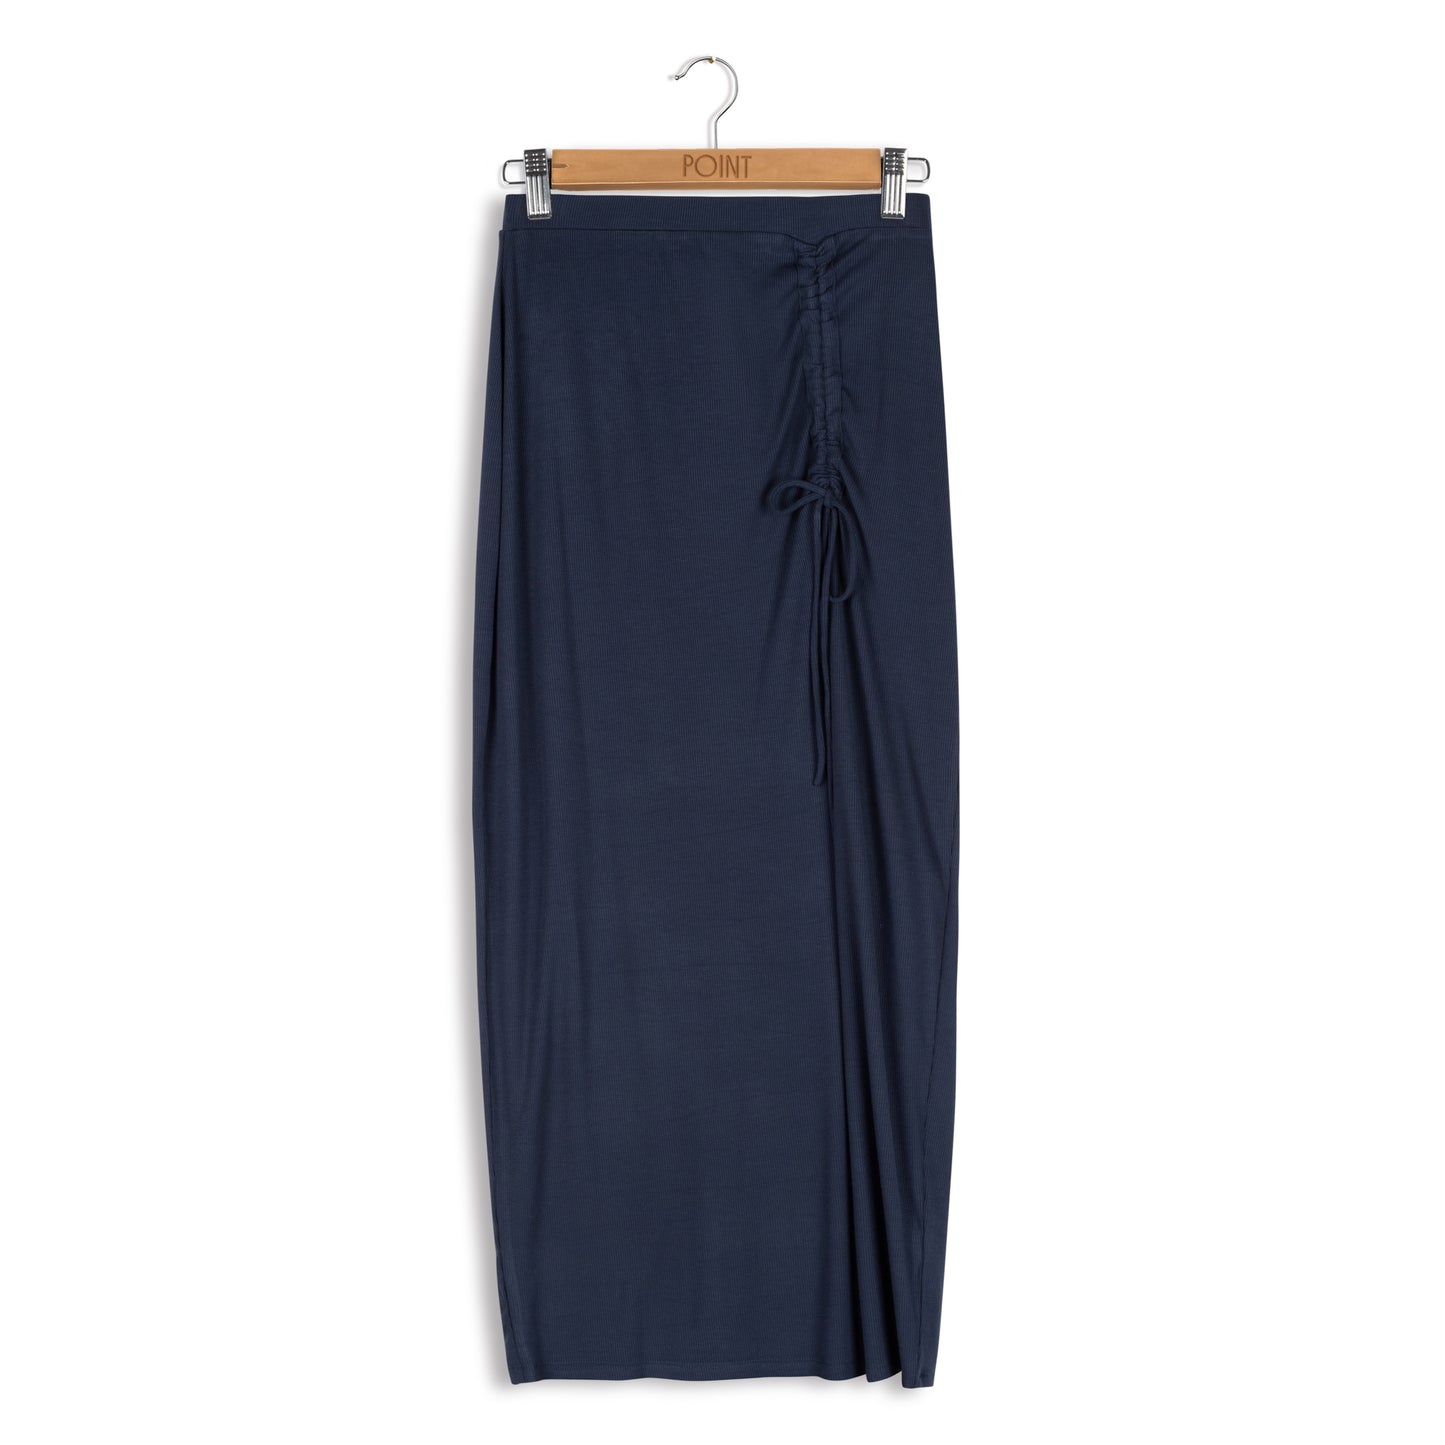 point ruched skirt